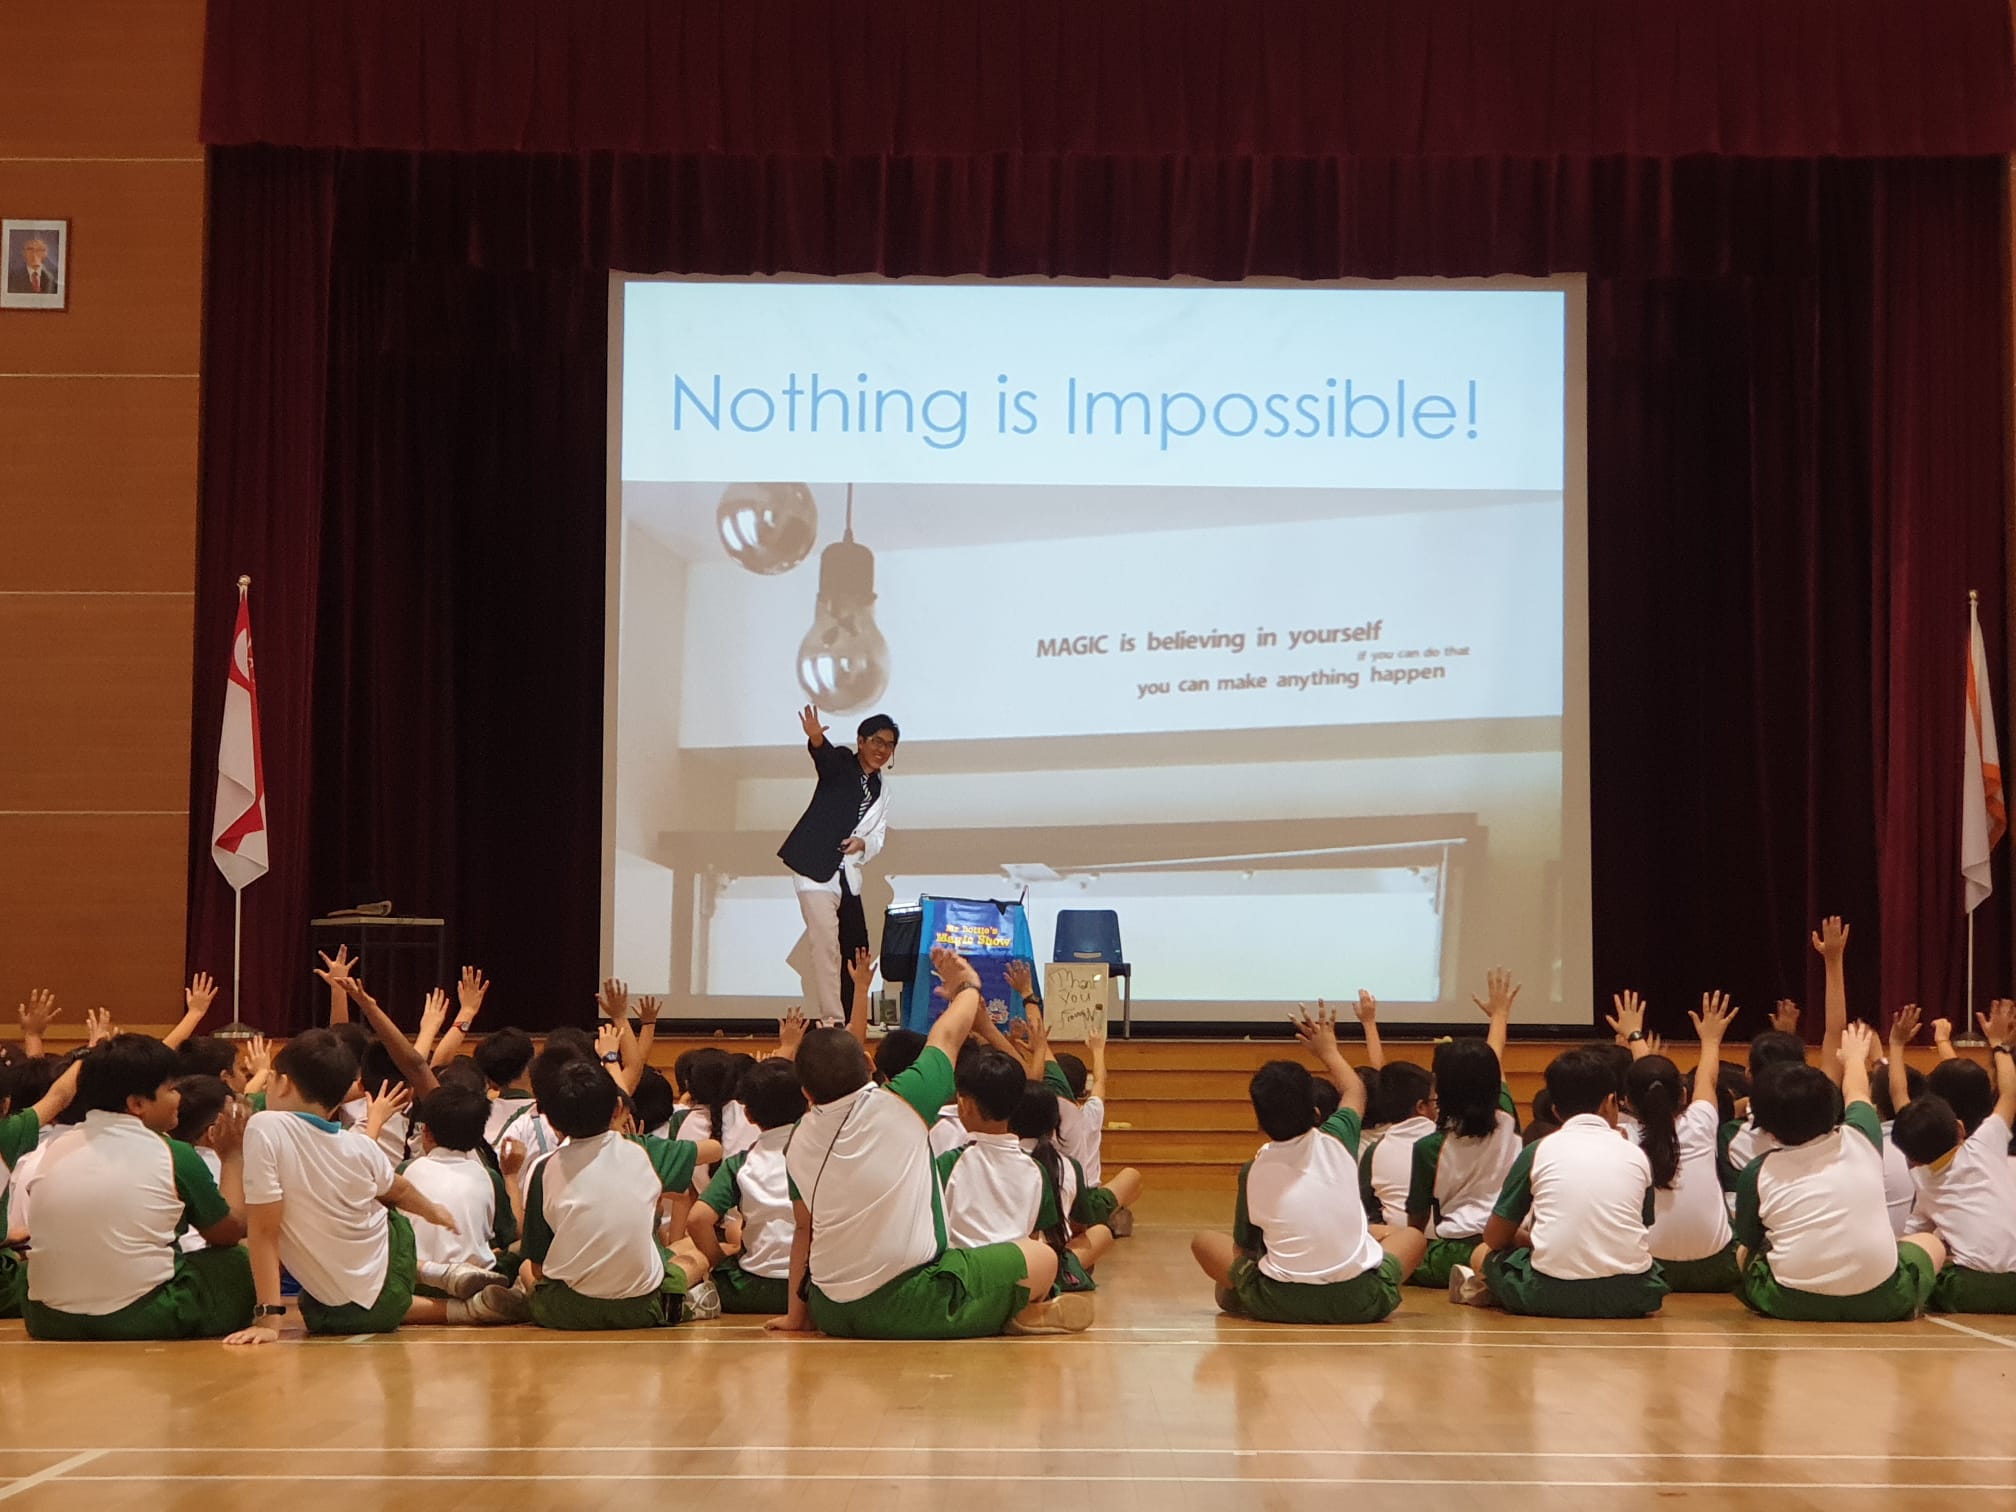 Nothing is impossible tedtalk to inspire children